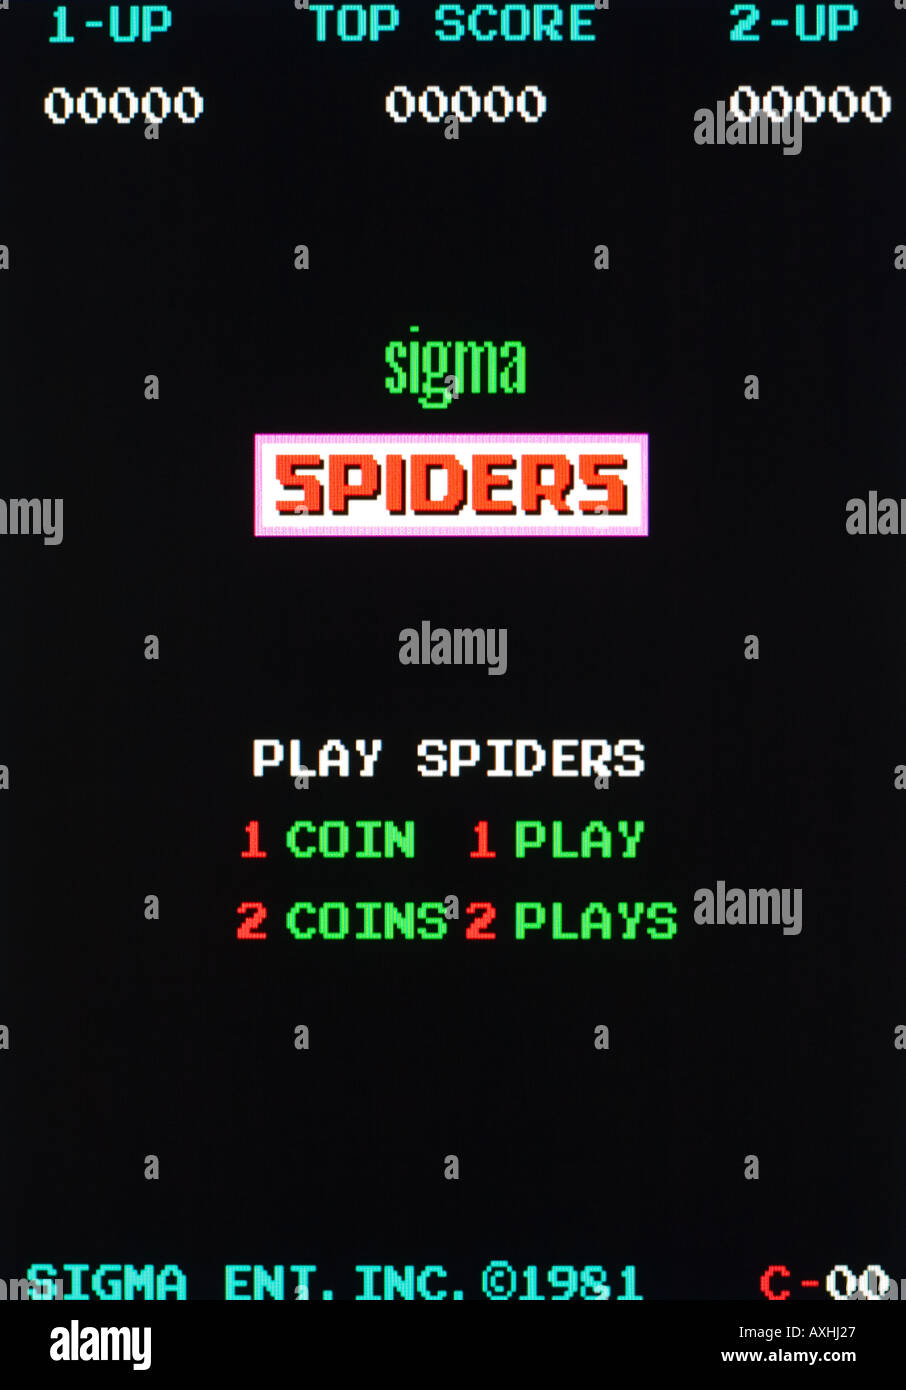 Spiders Sigman Ent Inc 1981 Vintage arcade videogame screen shot - EDITORIAL USE ONLY Stock Photo